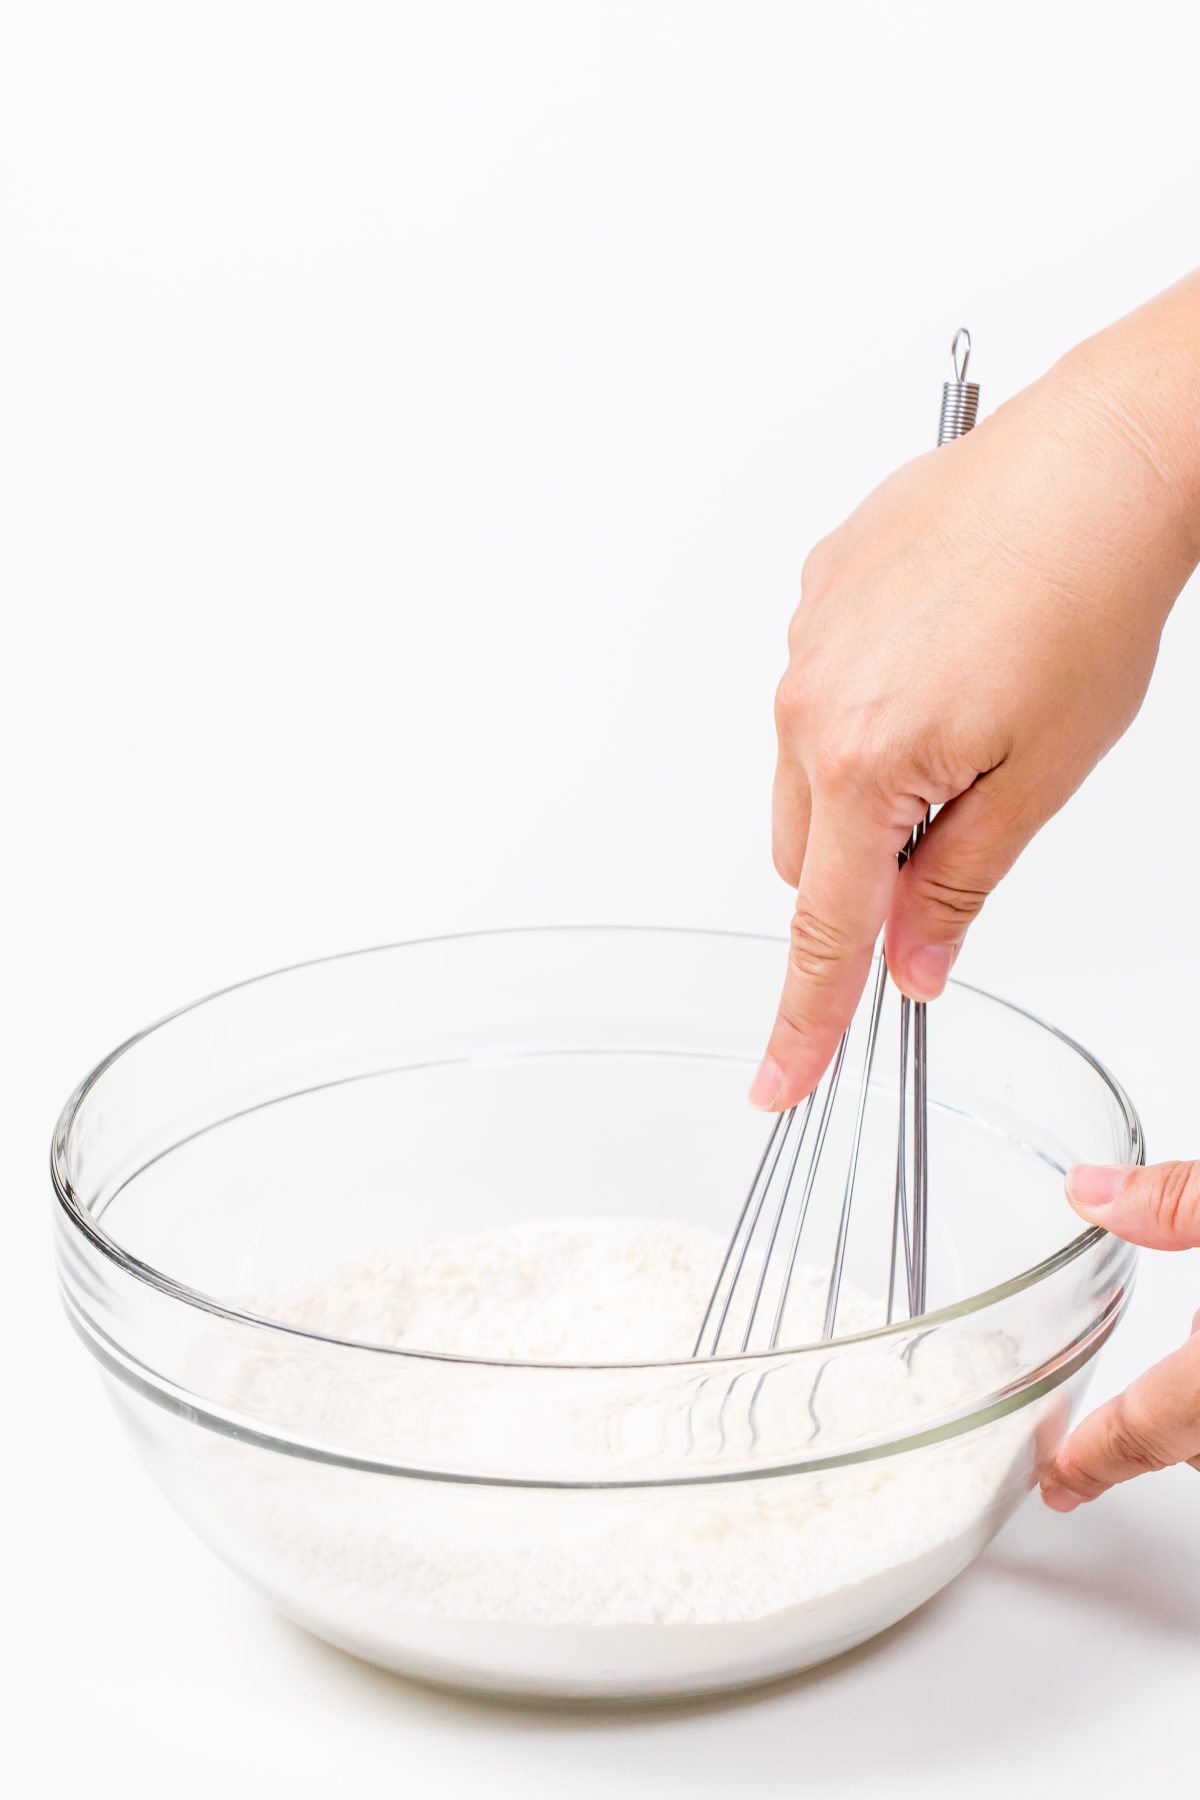 Stir flour and cake flour together in a mixing bowl